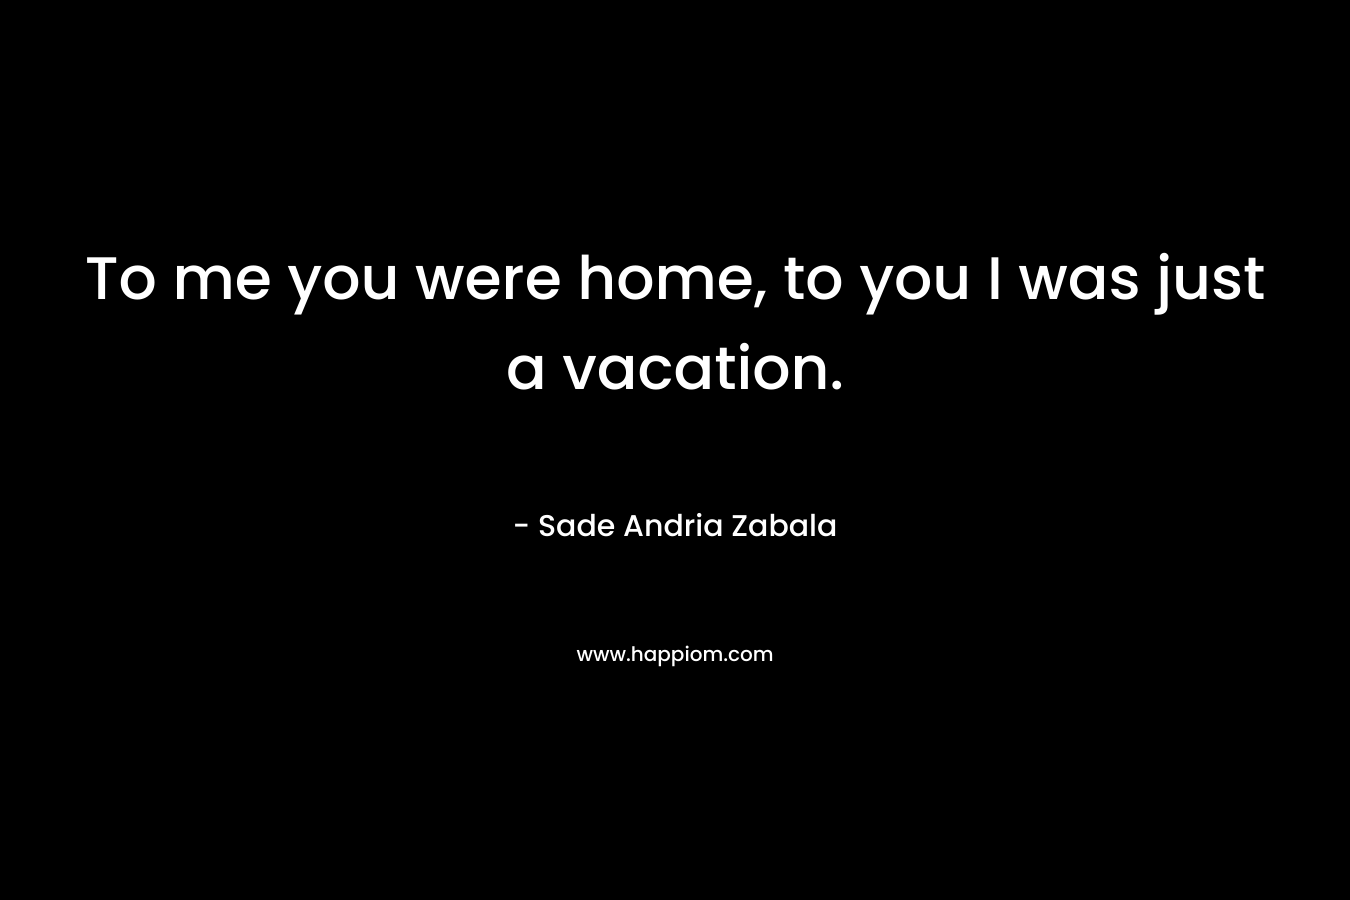 To me you were home, to you I was just a vacation.